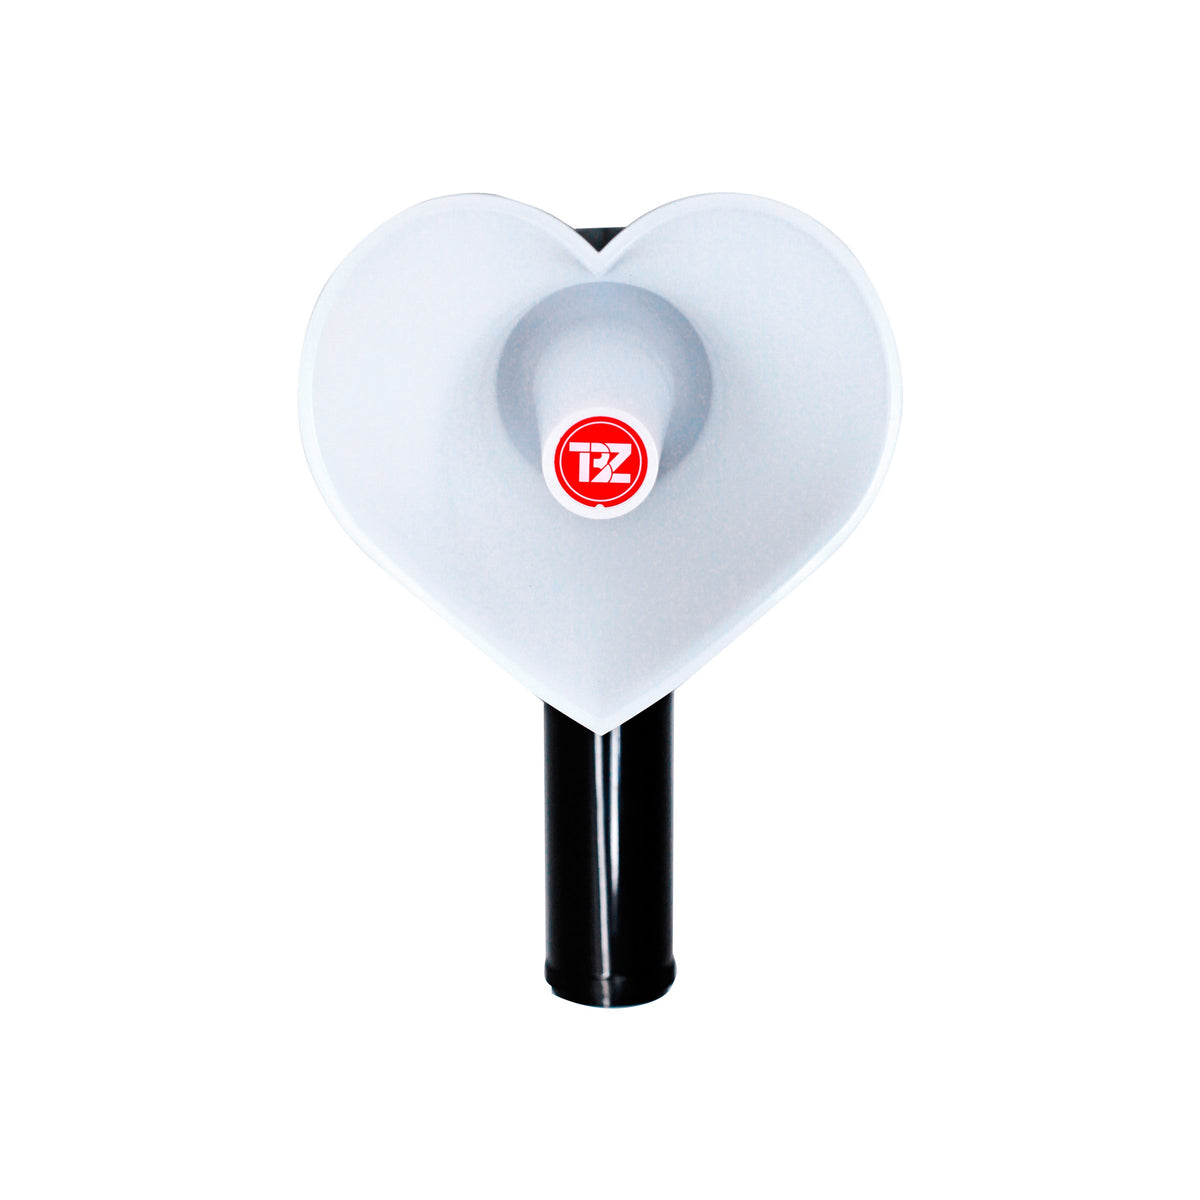 THE BOYZ Official Light Stick Main Product Image 2